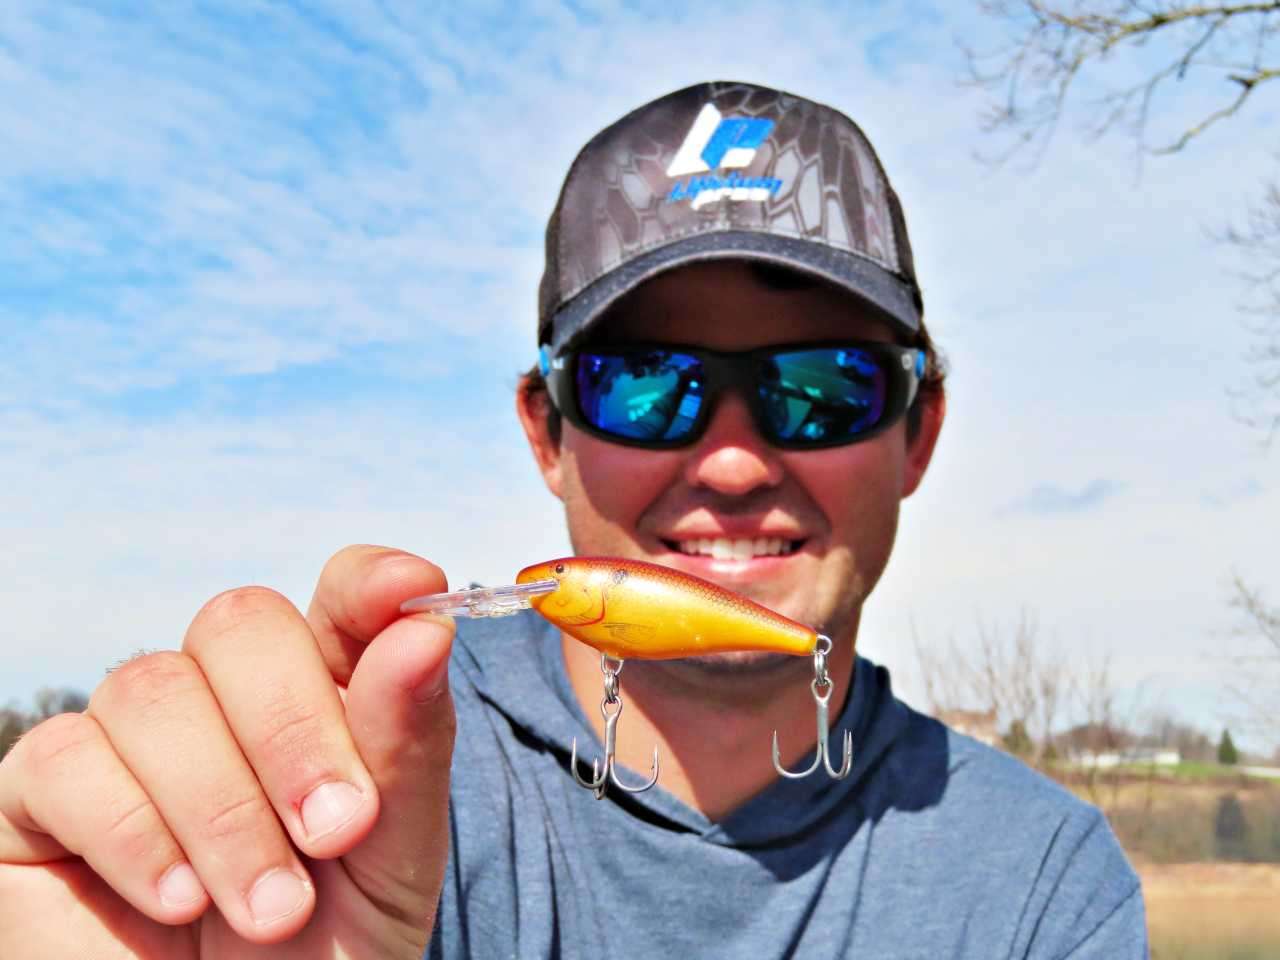 Hamilton suggests packing a utility crankbait that can work effectively at multiple depths and retrieves. âSpringtime weather can move the fish back and forth across the water column, from deep, to midrange.â 
